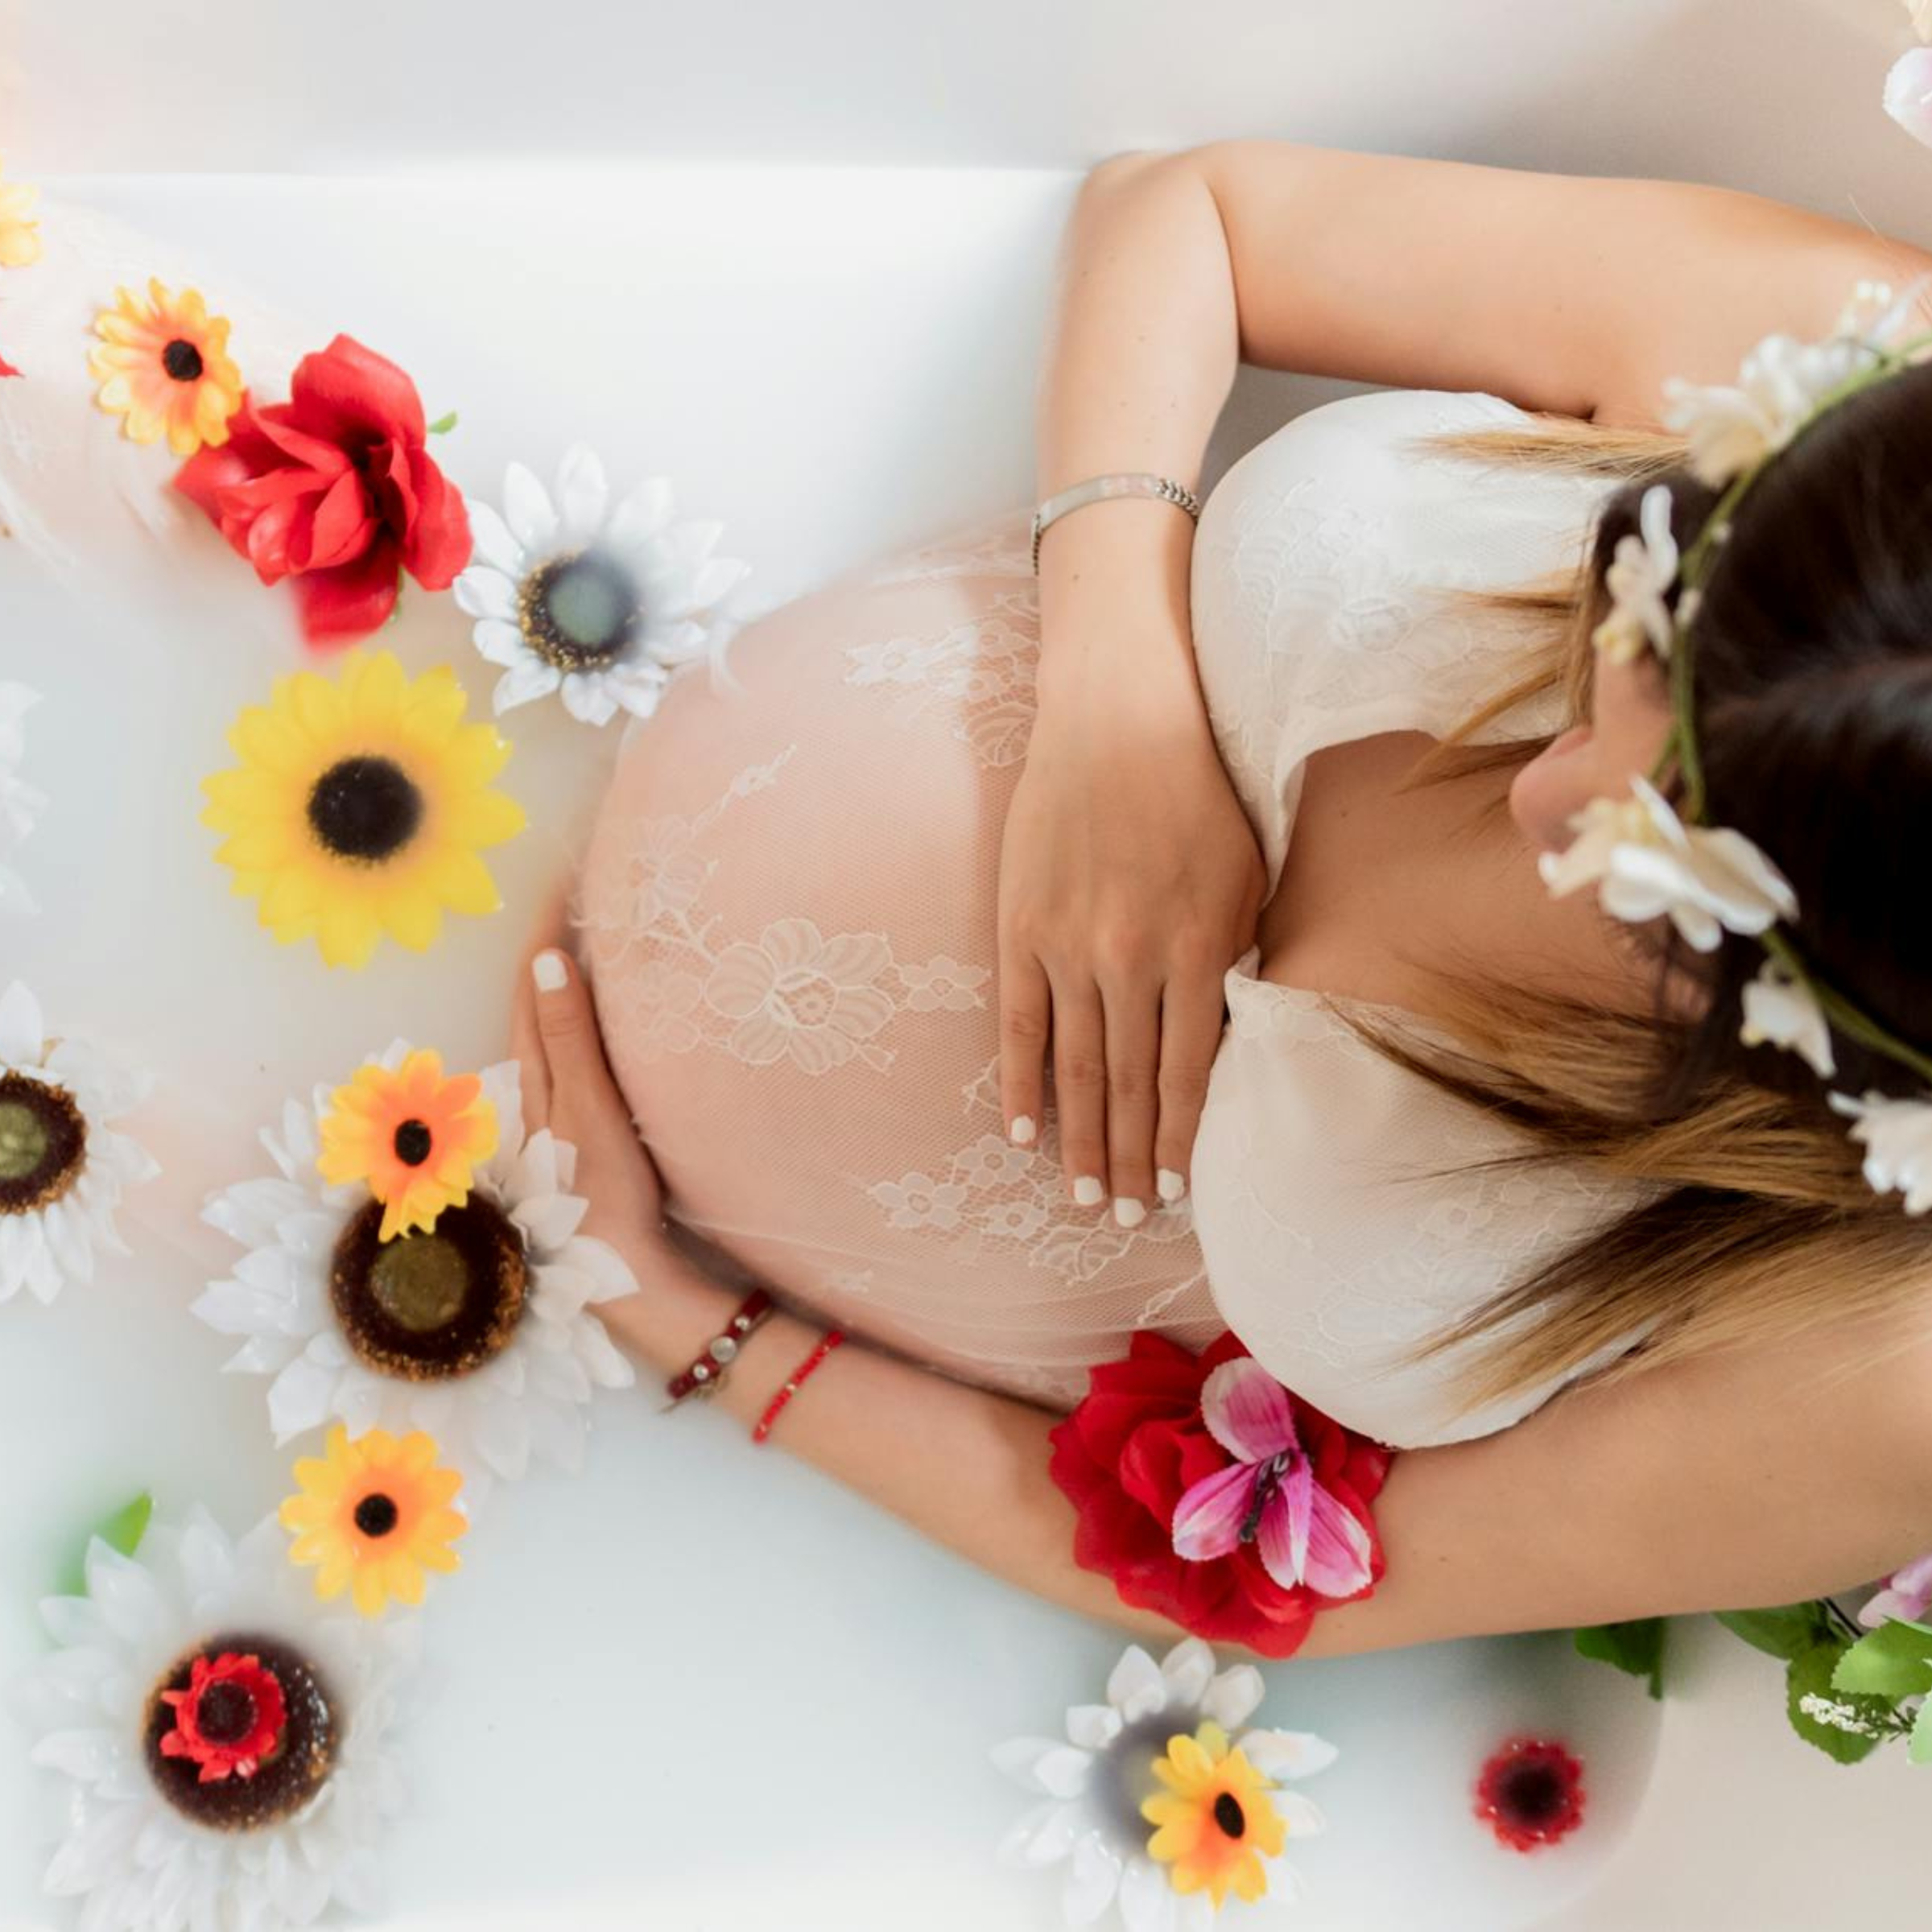 high angle shot of a pregnant woman sitting in a bathtub with flowers